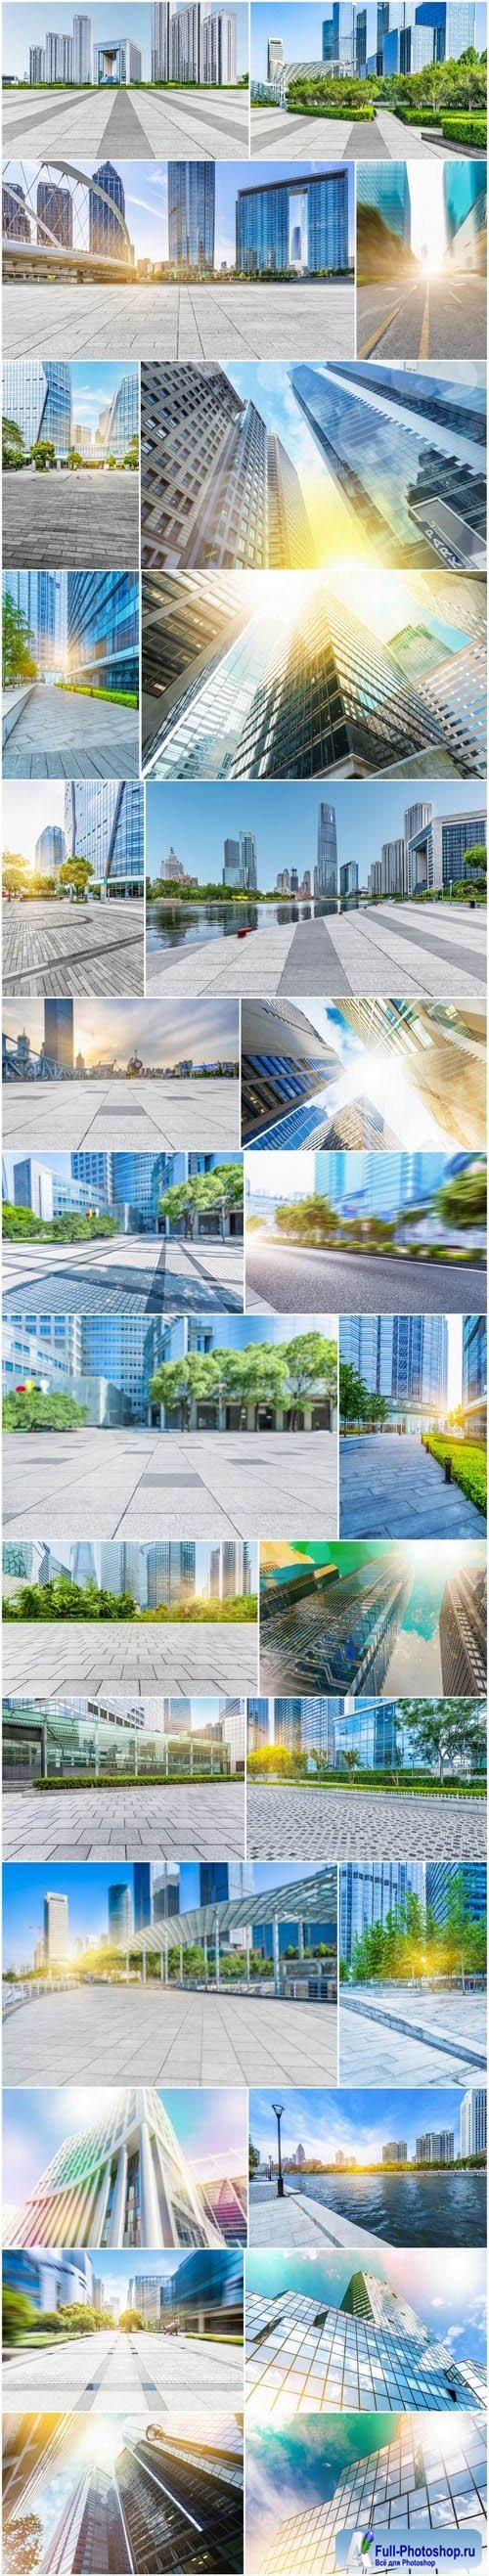 Modern Architecture 7 - Set of 30xUHQ JPEG Professional Stock Images